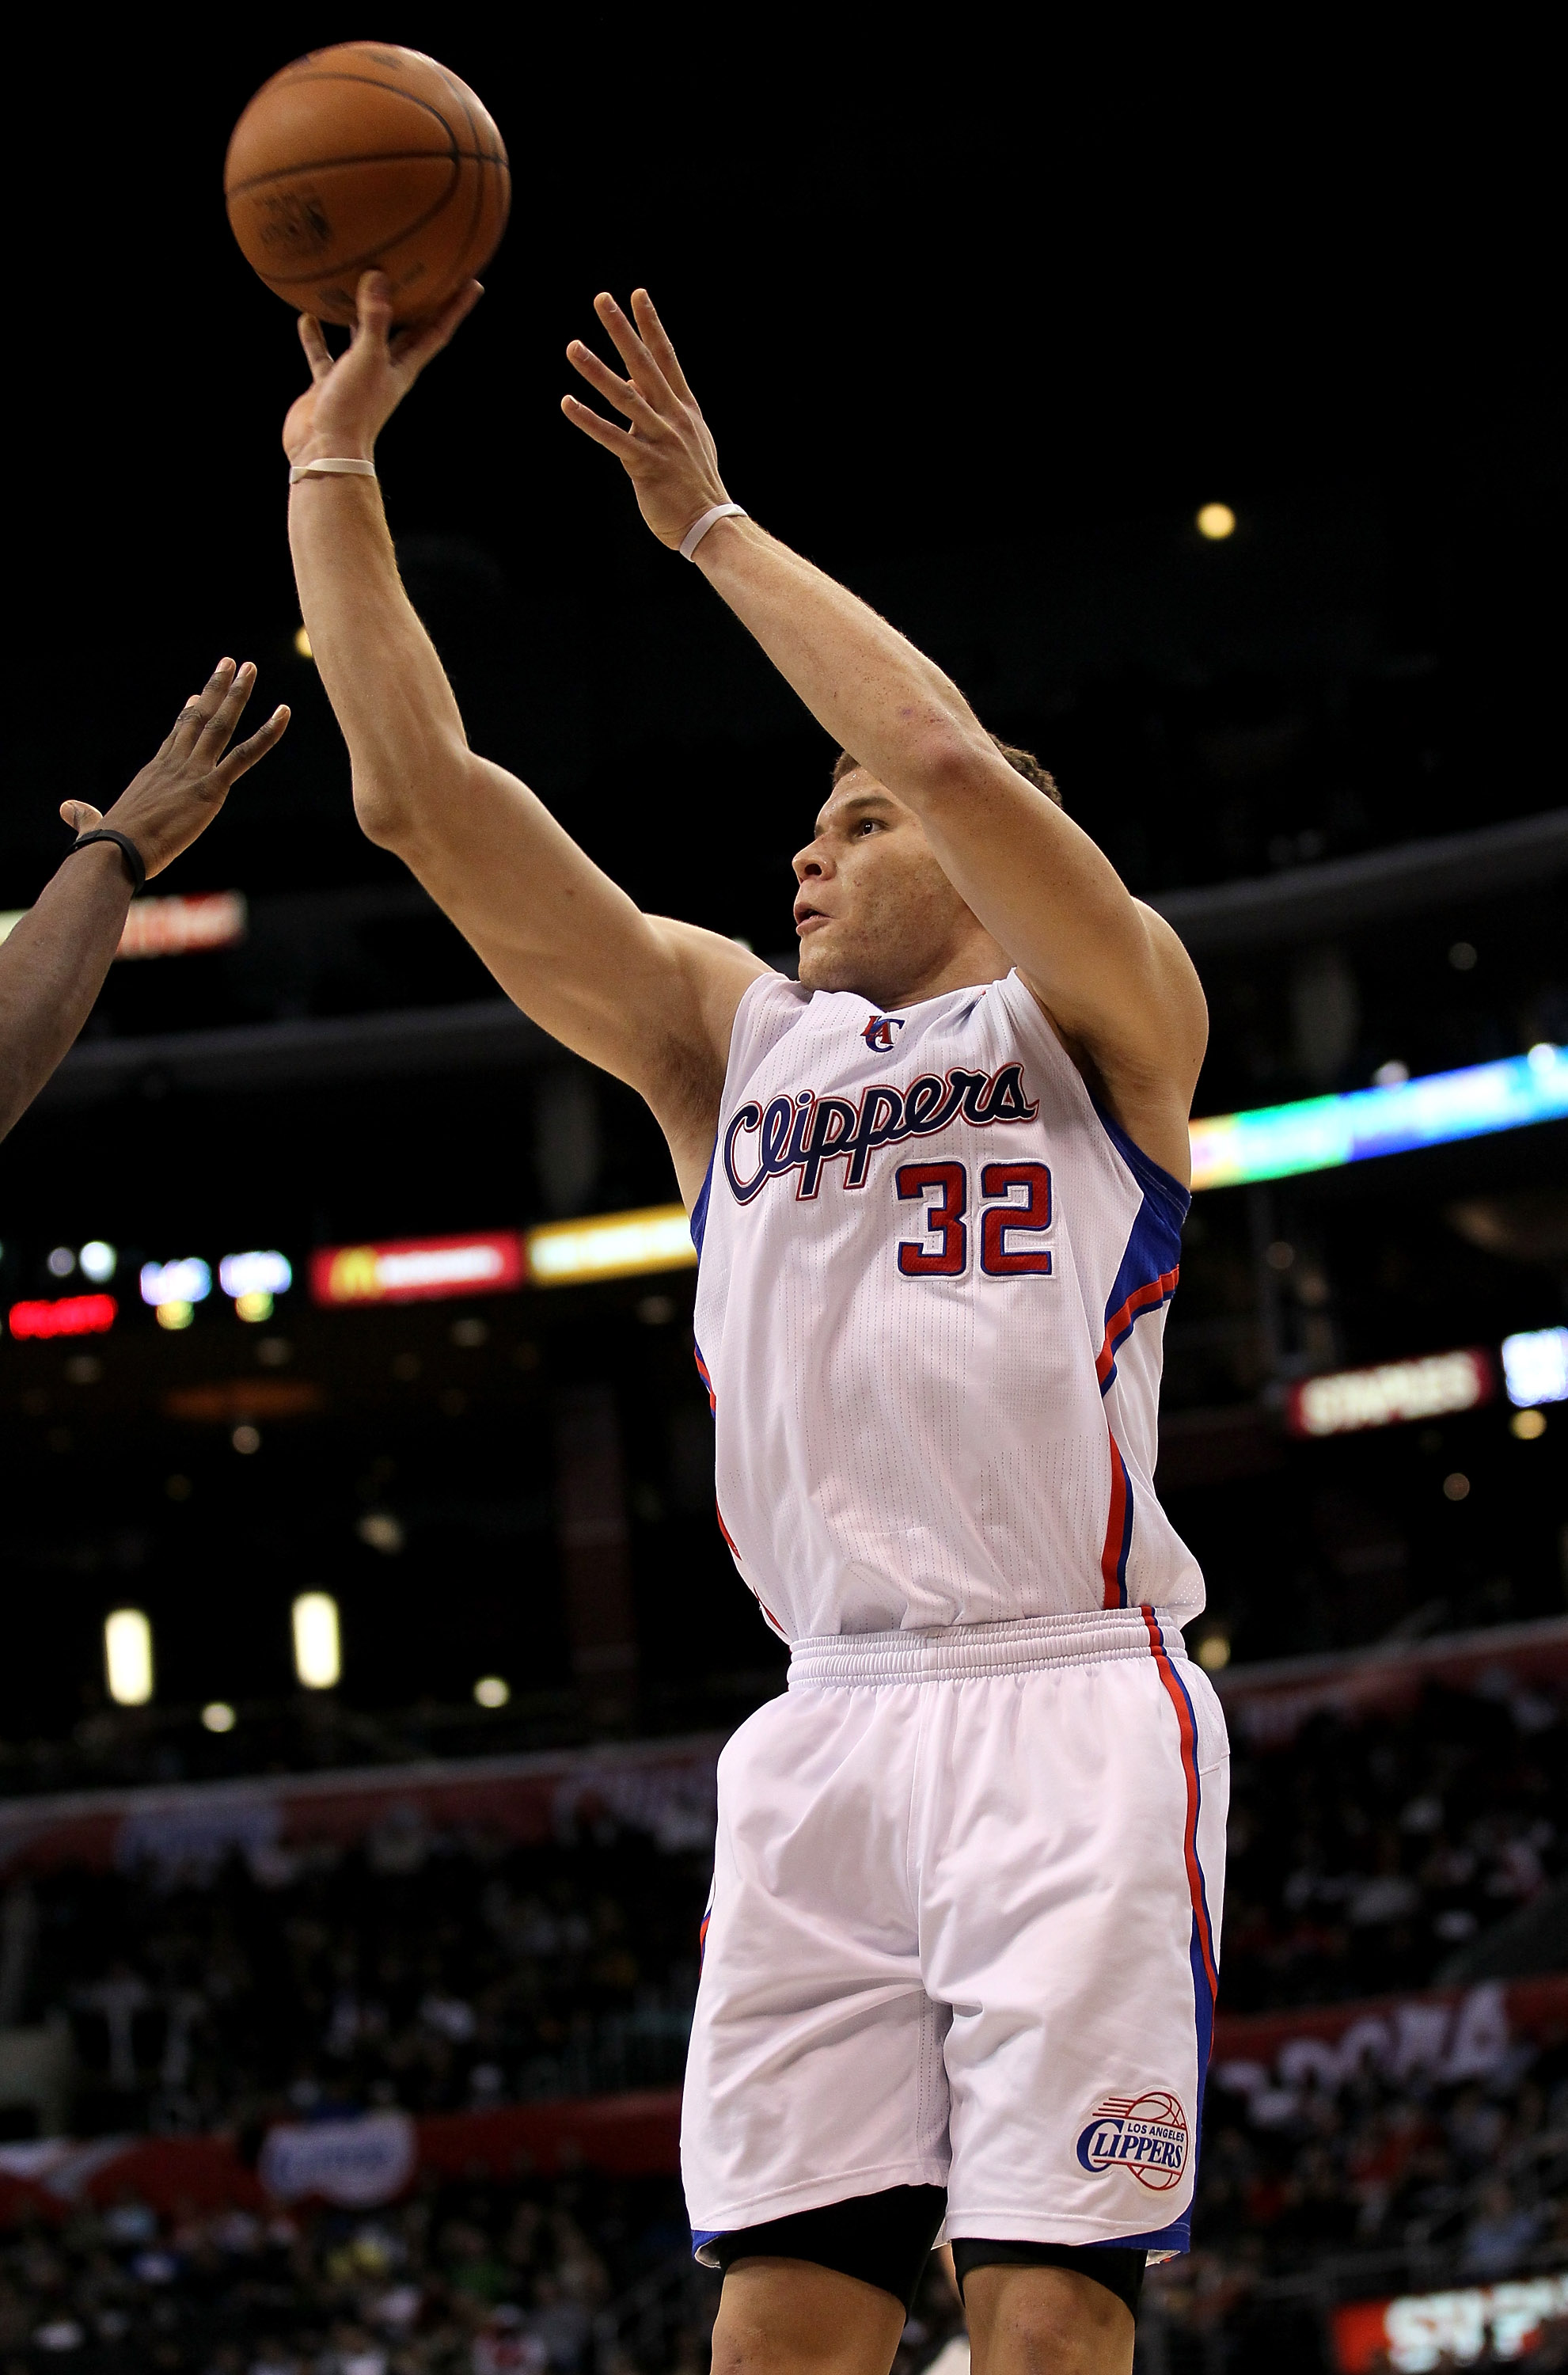 This is a photo of Blake Griffin in his 2010 season with the Clippers.